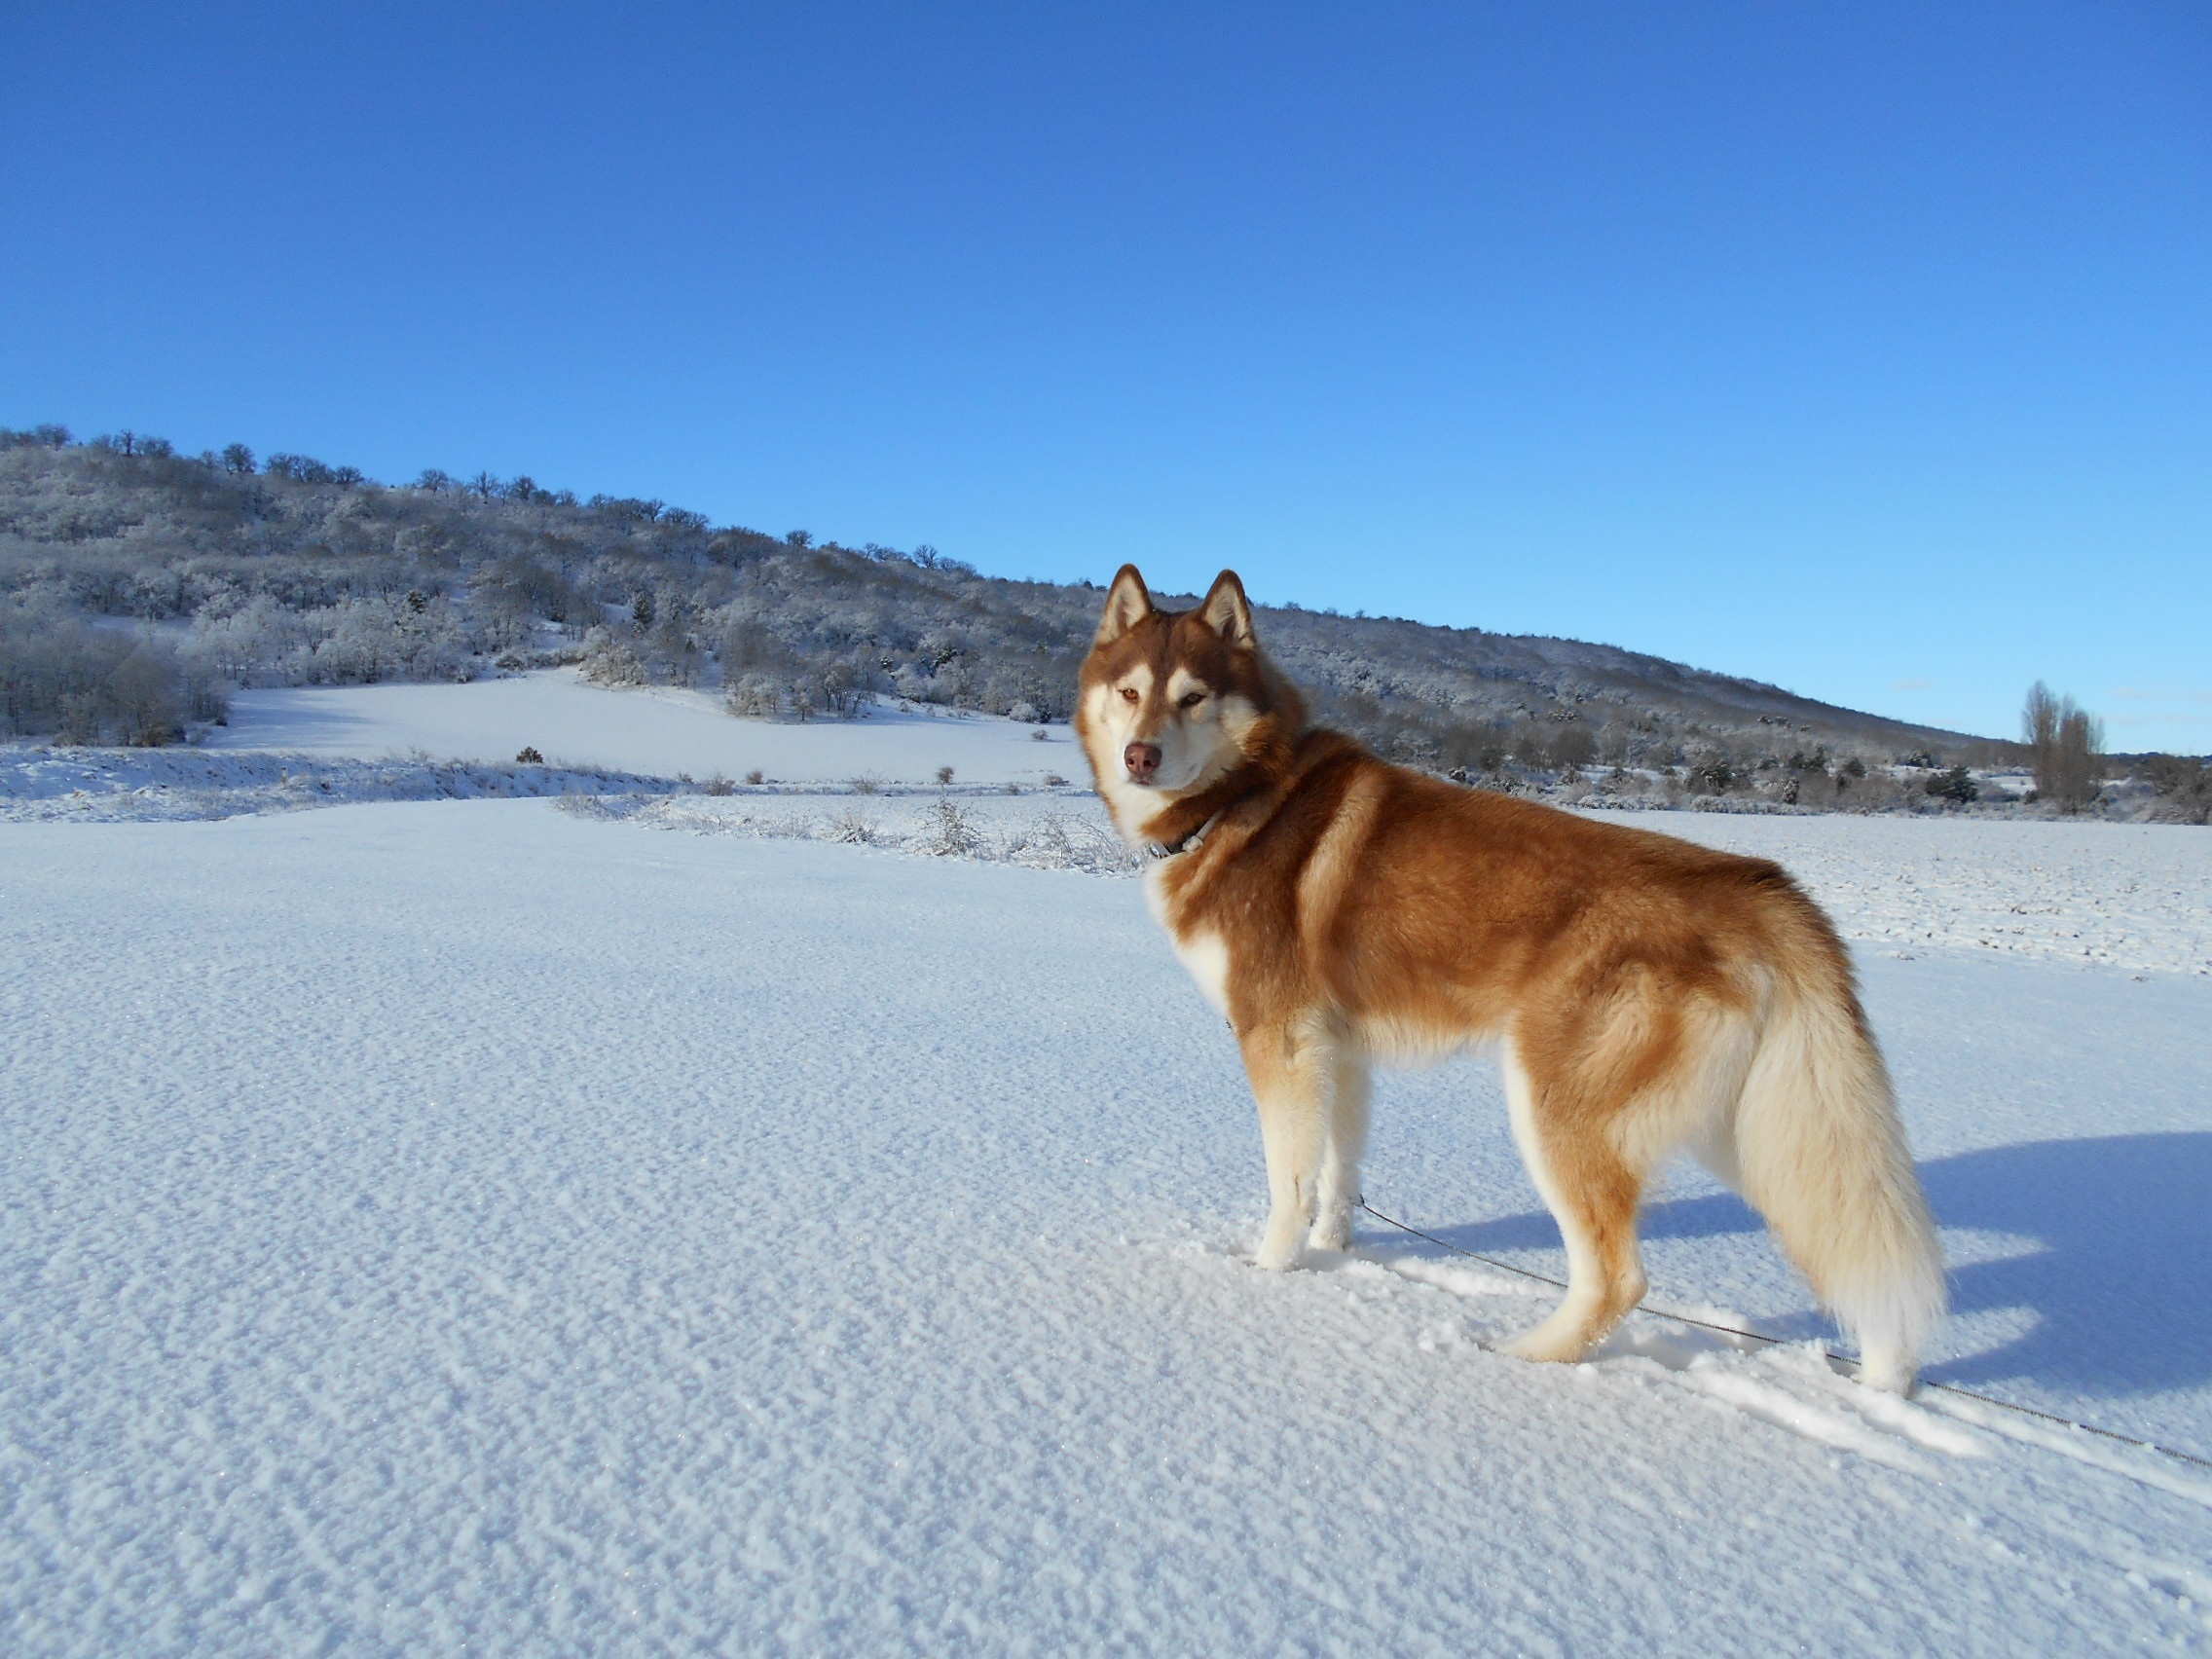 Siberian Husky in the winter snow by MilanoNegro